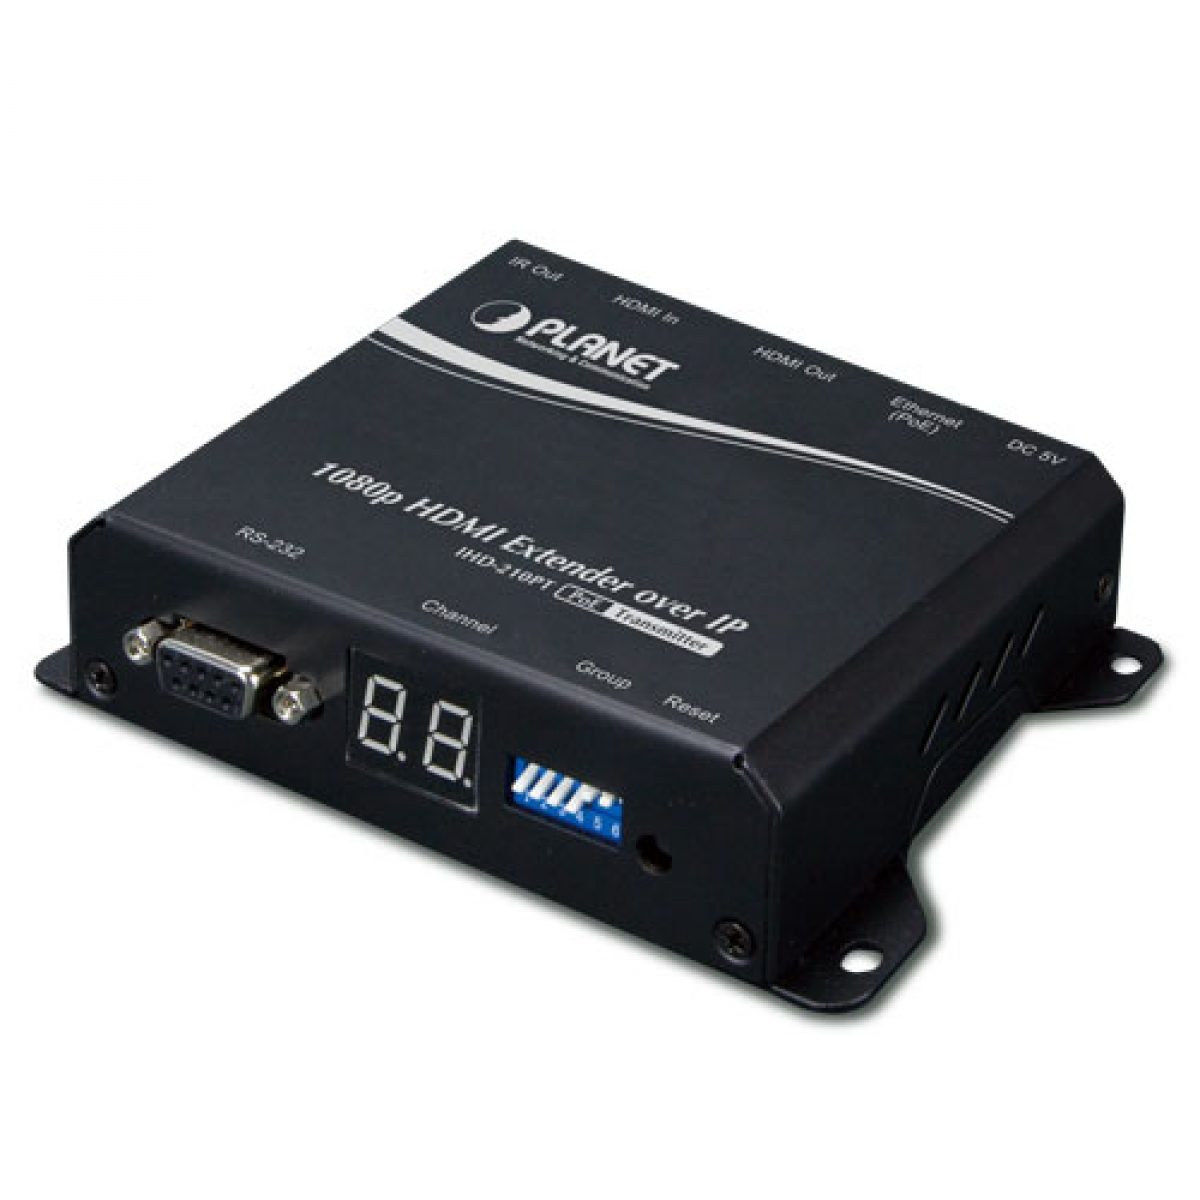 IHD-210PT High Definition HDMI Extender Transmitter over IP with PoE-  Digital Signage - Planet Technology USA